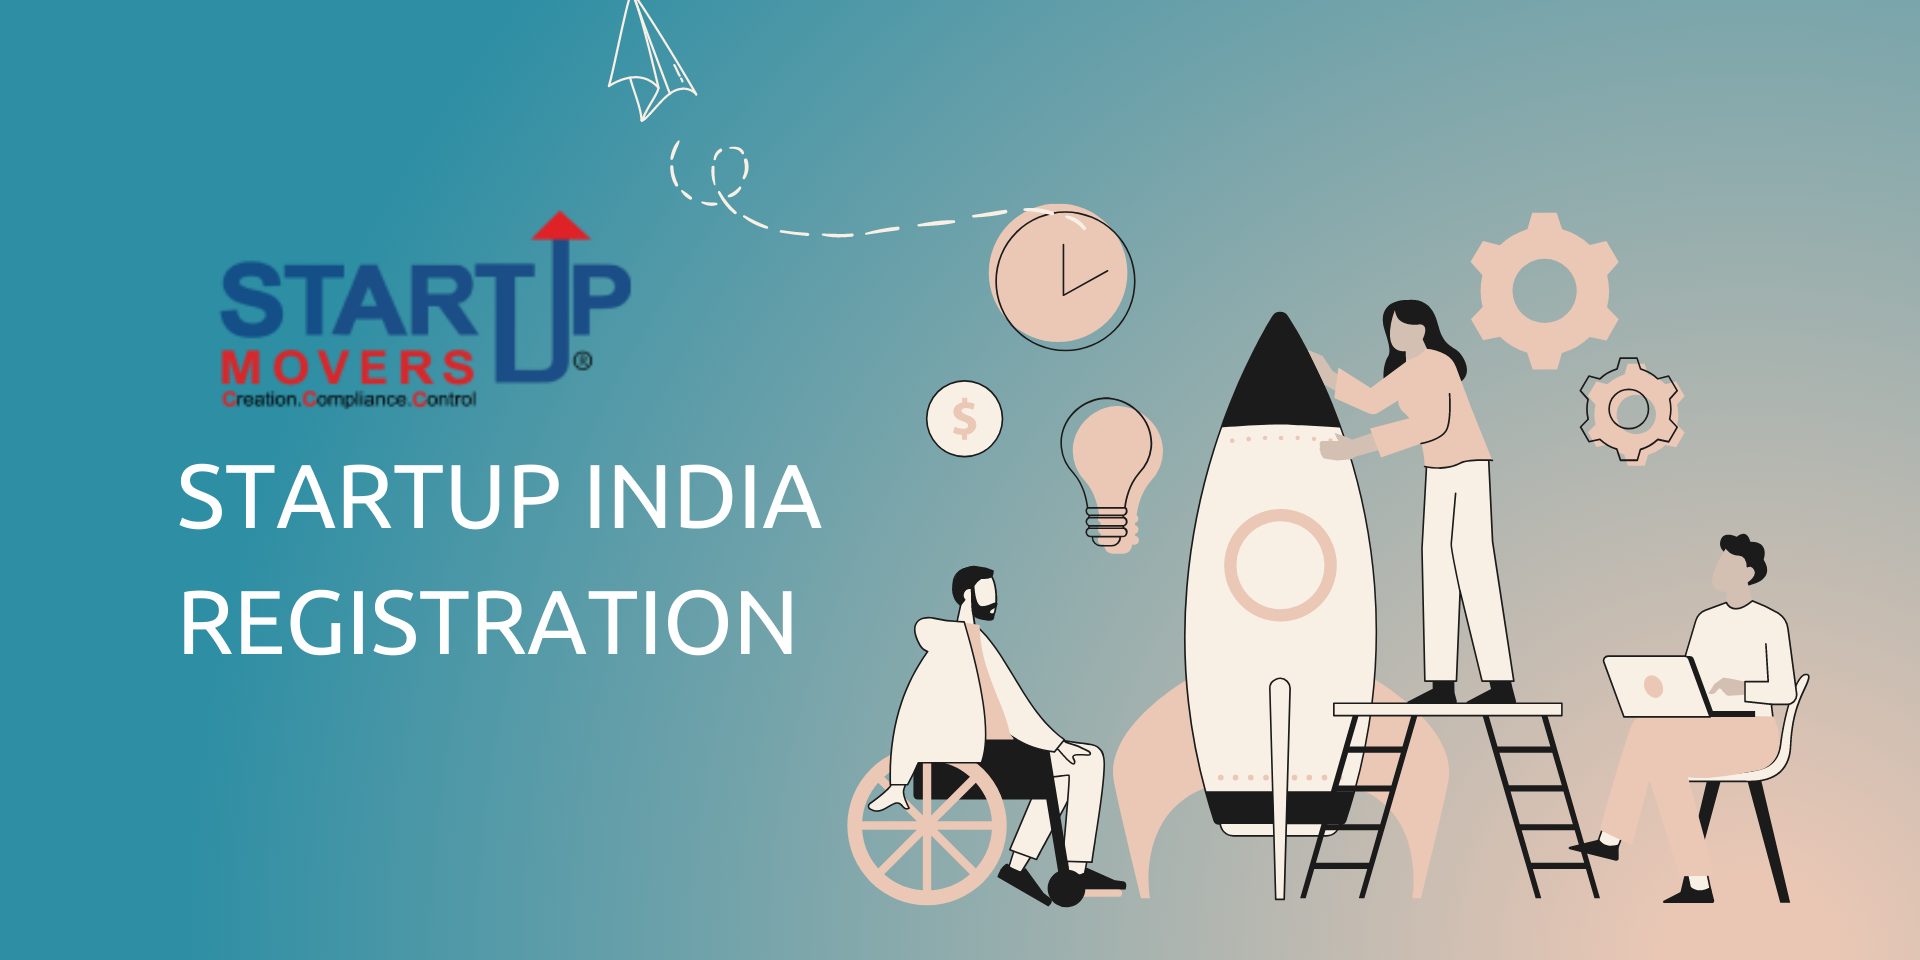 Benefits of startup India registration for new startups including funding schemes available